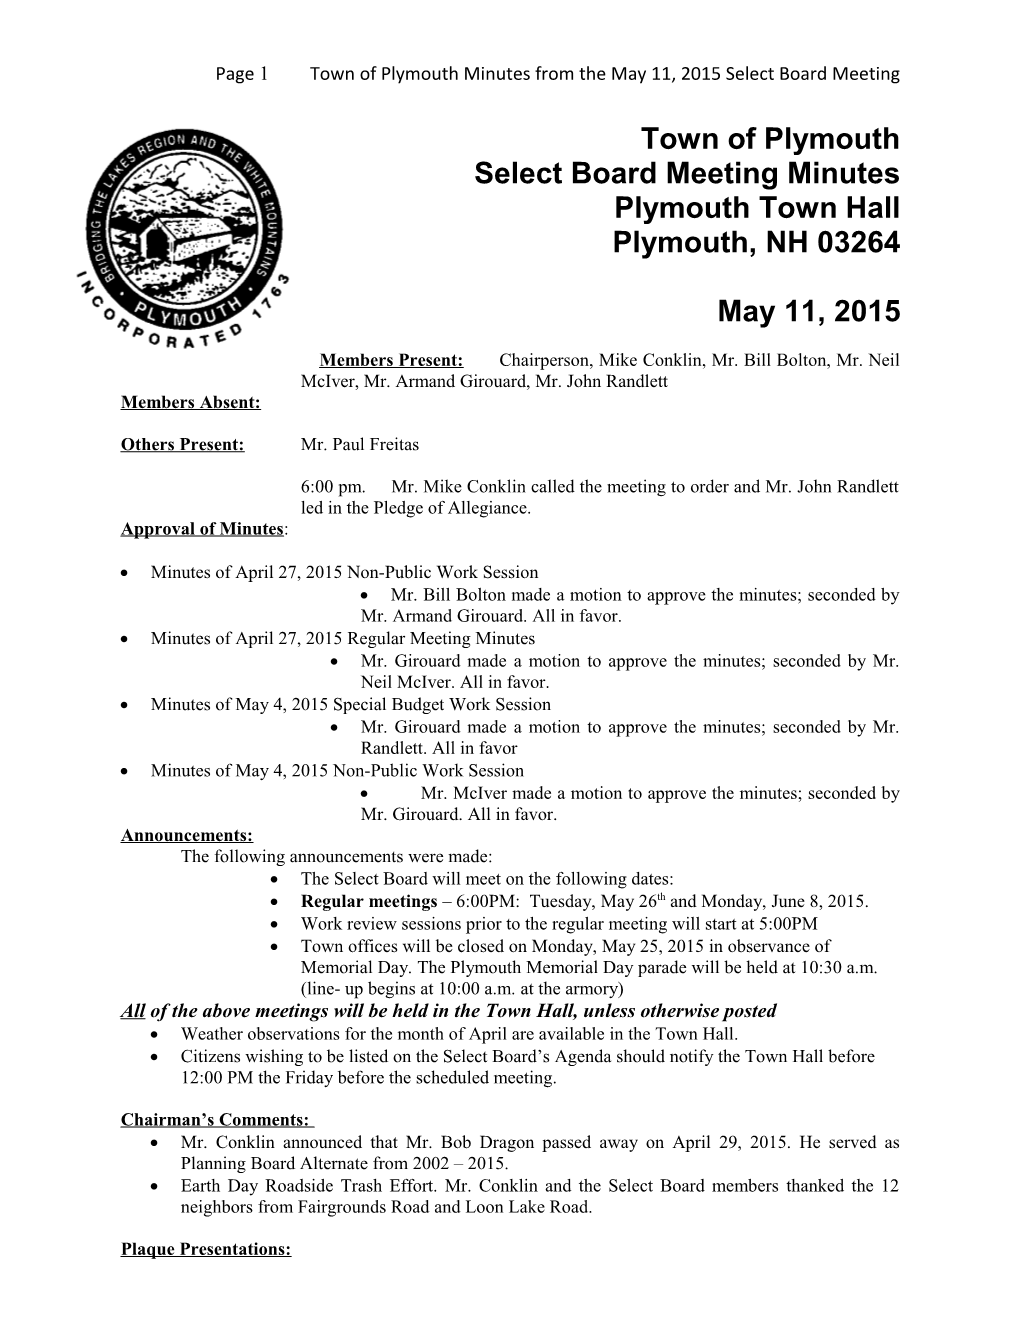 Page 1Town of Plymouth Minutes from Themay 11, 2015 Select Board Meeting